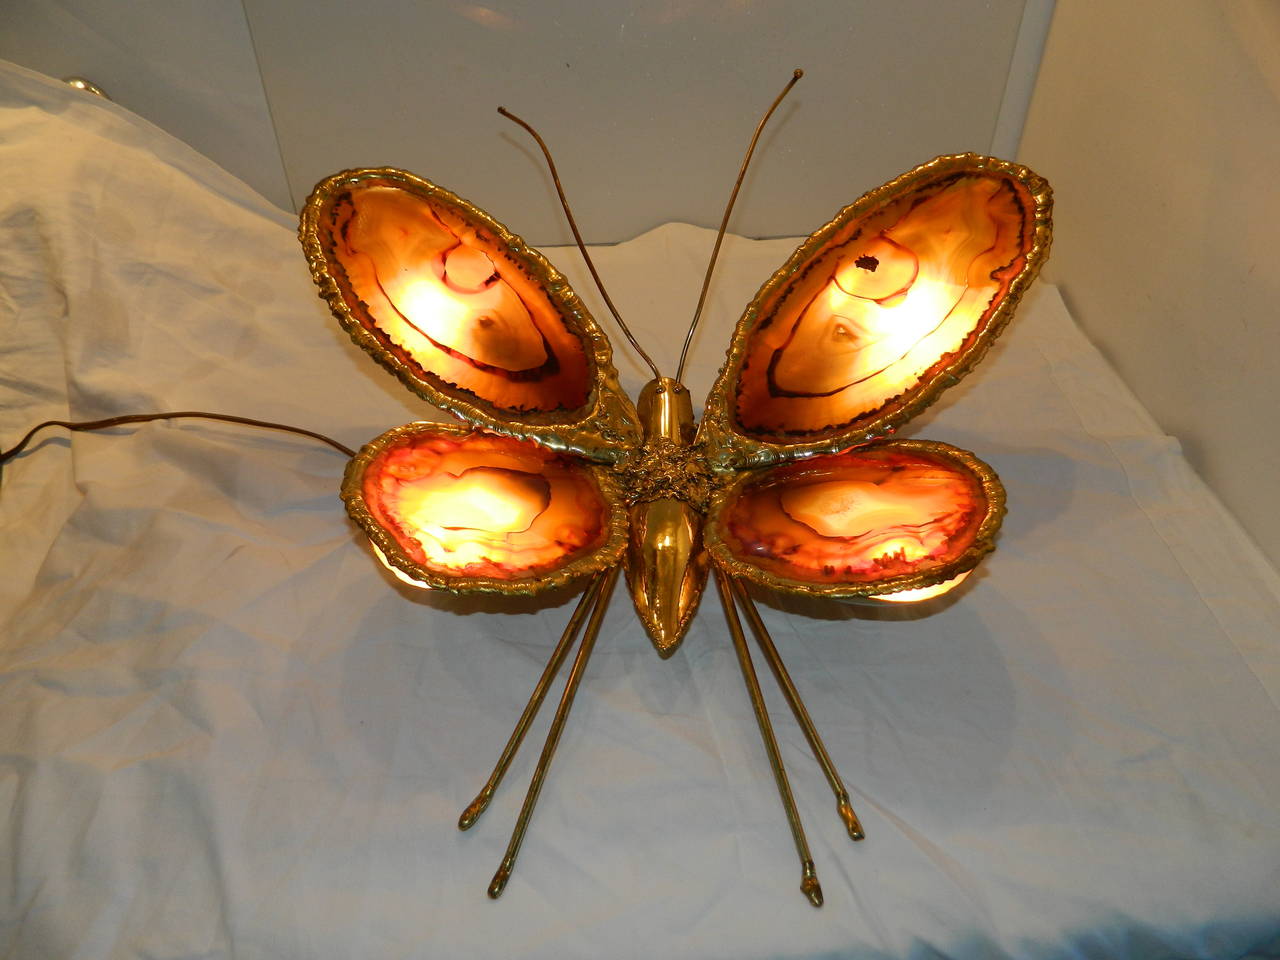 Large Duval-Brasseur sconce, featuring a butterfly.
The four wings are made with agate stone, four bulbs.
Give a smooth and magical light.
US wired and in working condition.
Have a look on our impressive collection of French and Italian